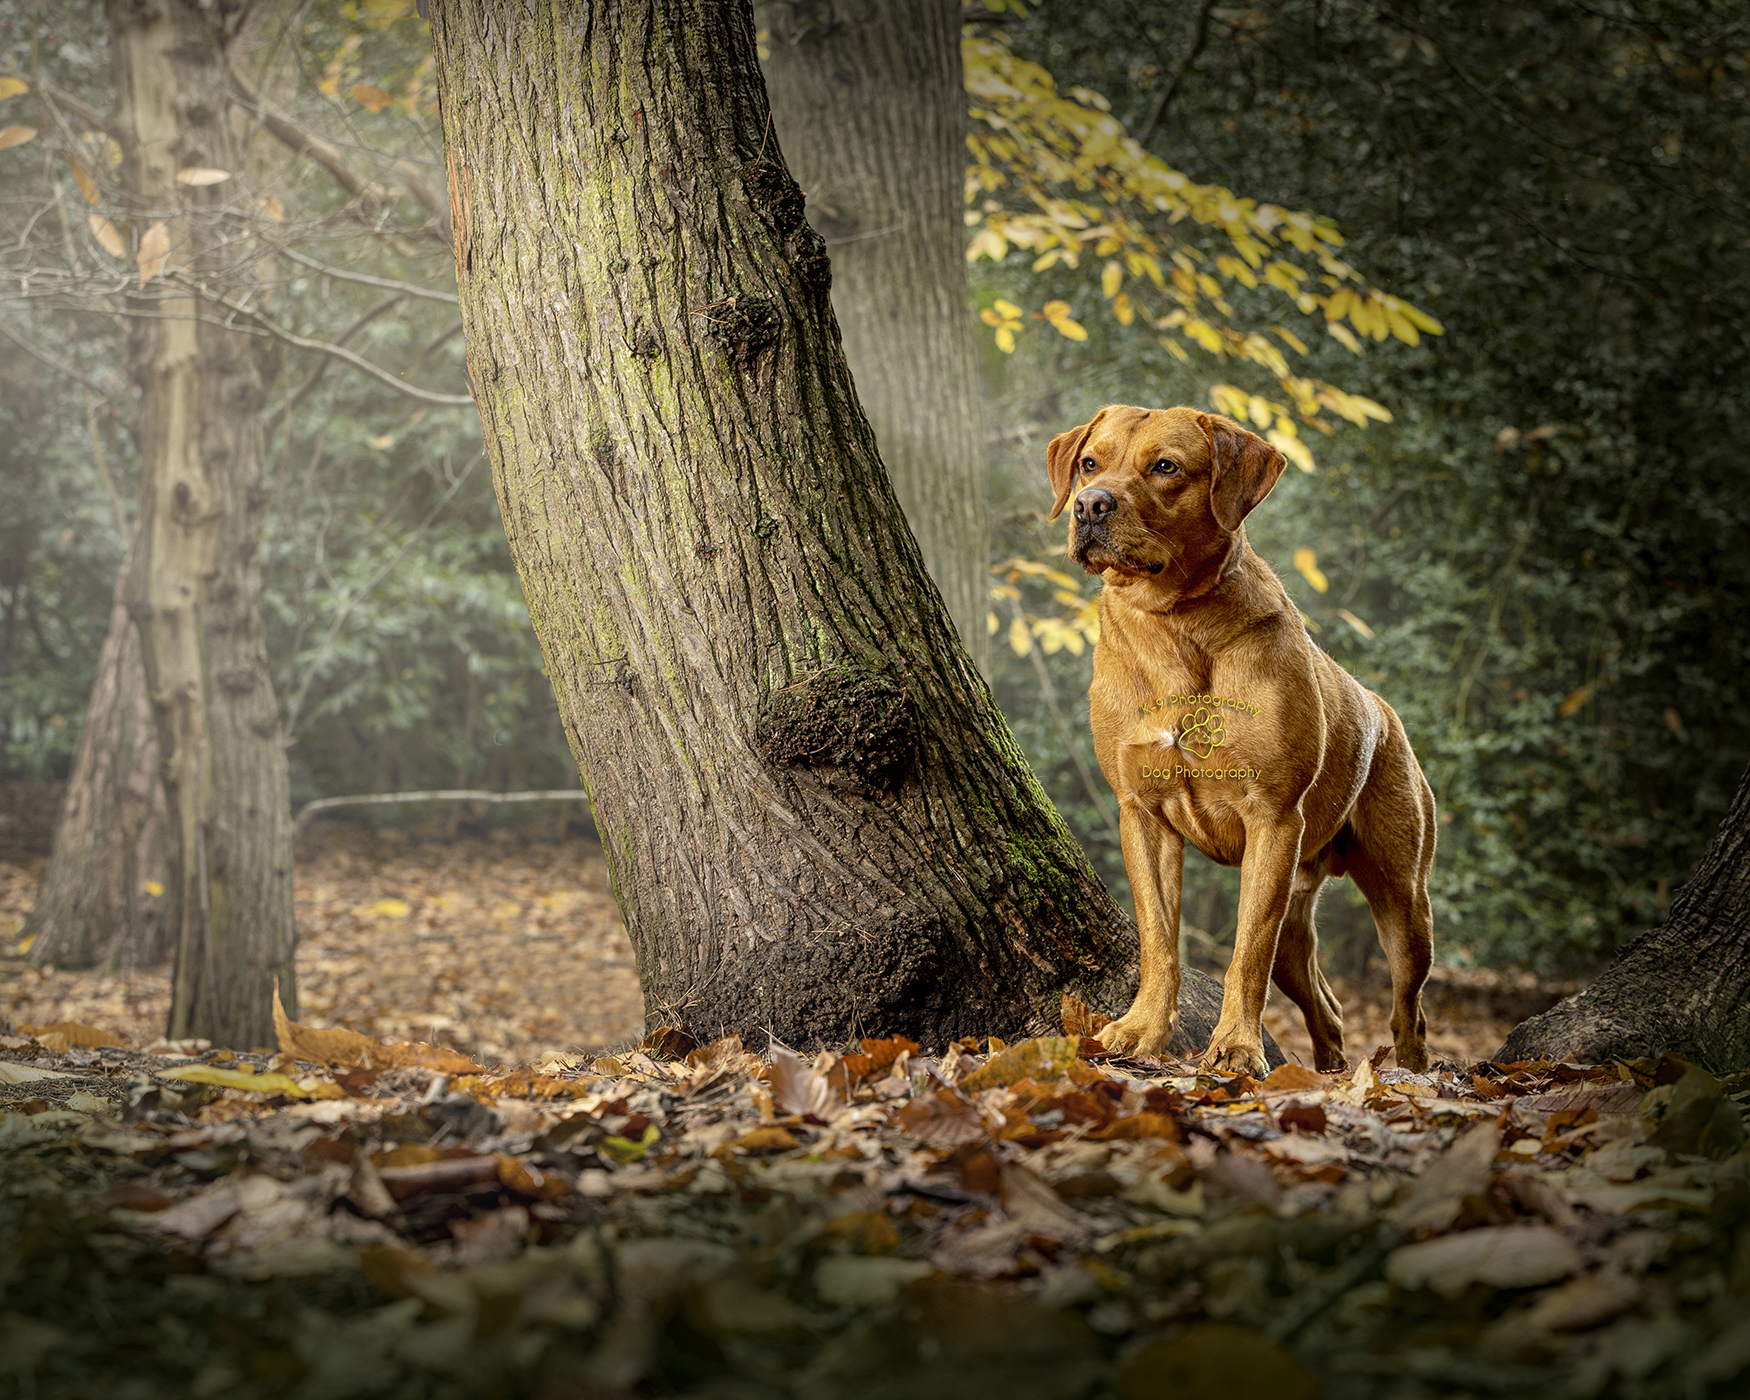 Beautiful location dog photography by Adrian Bullers an Award winning Pet photographer in the UK